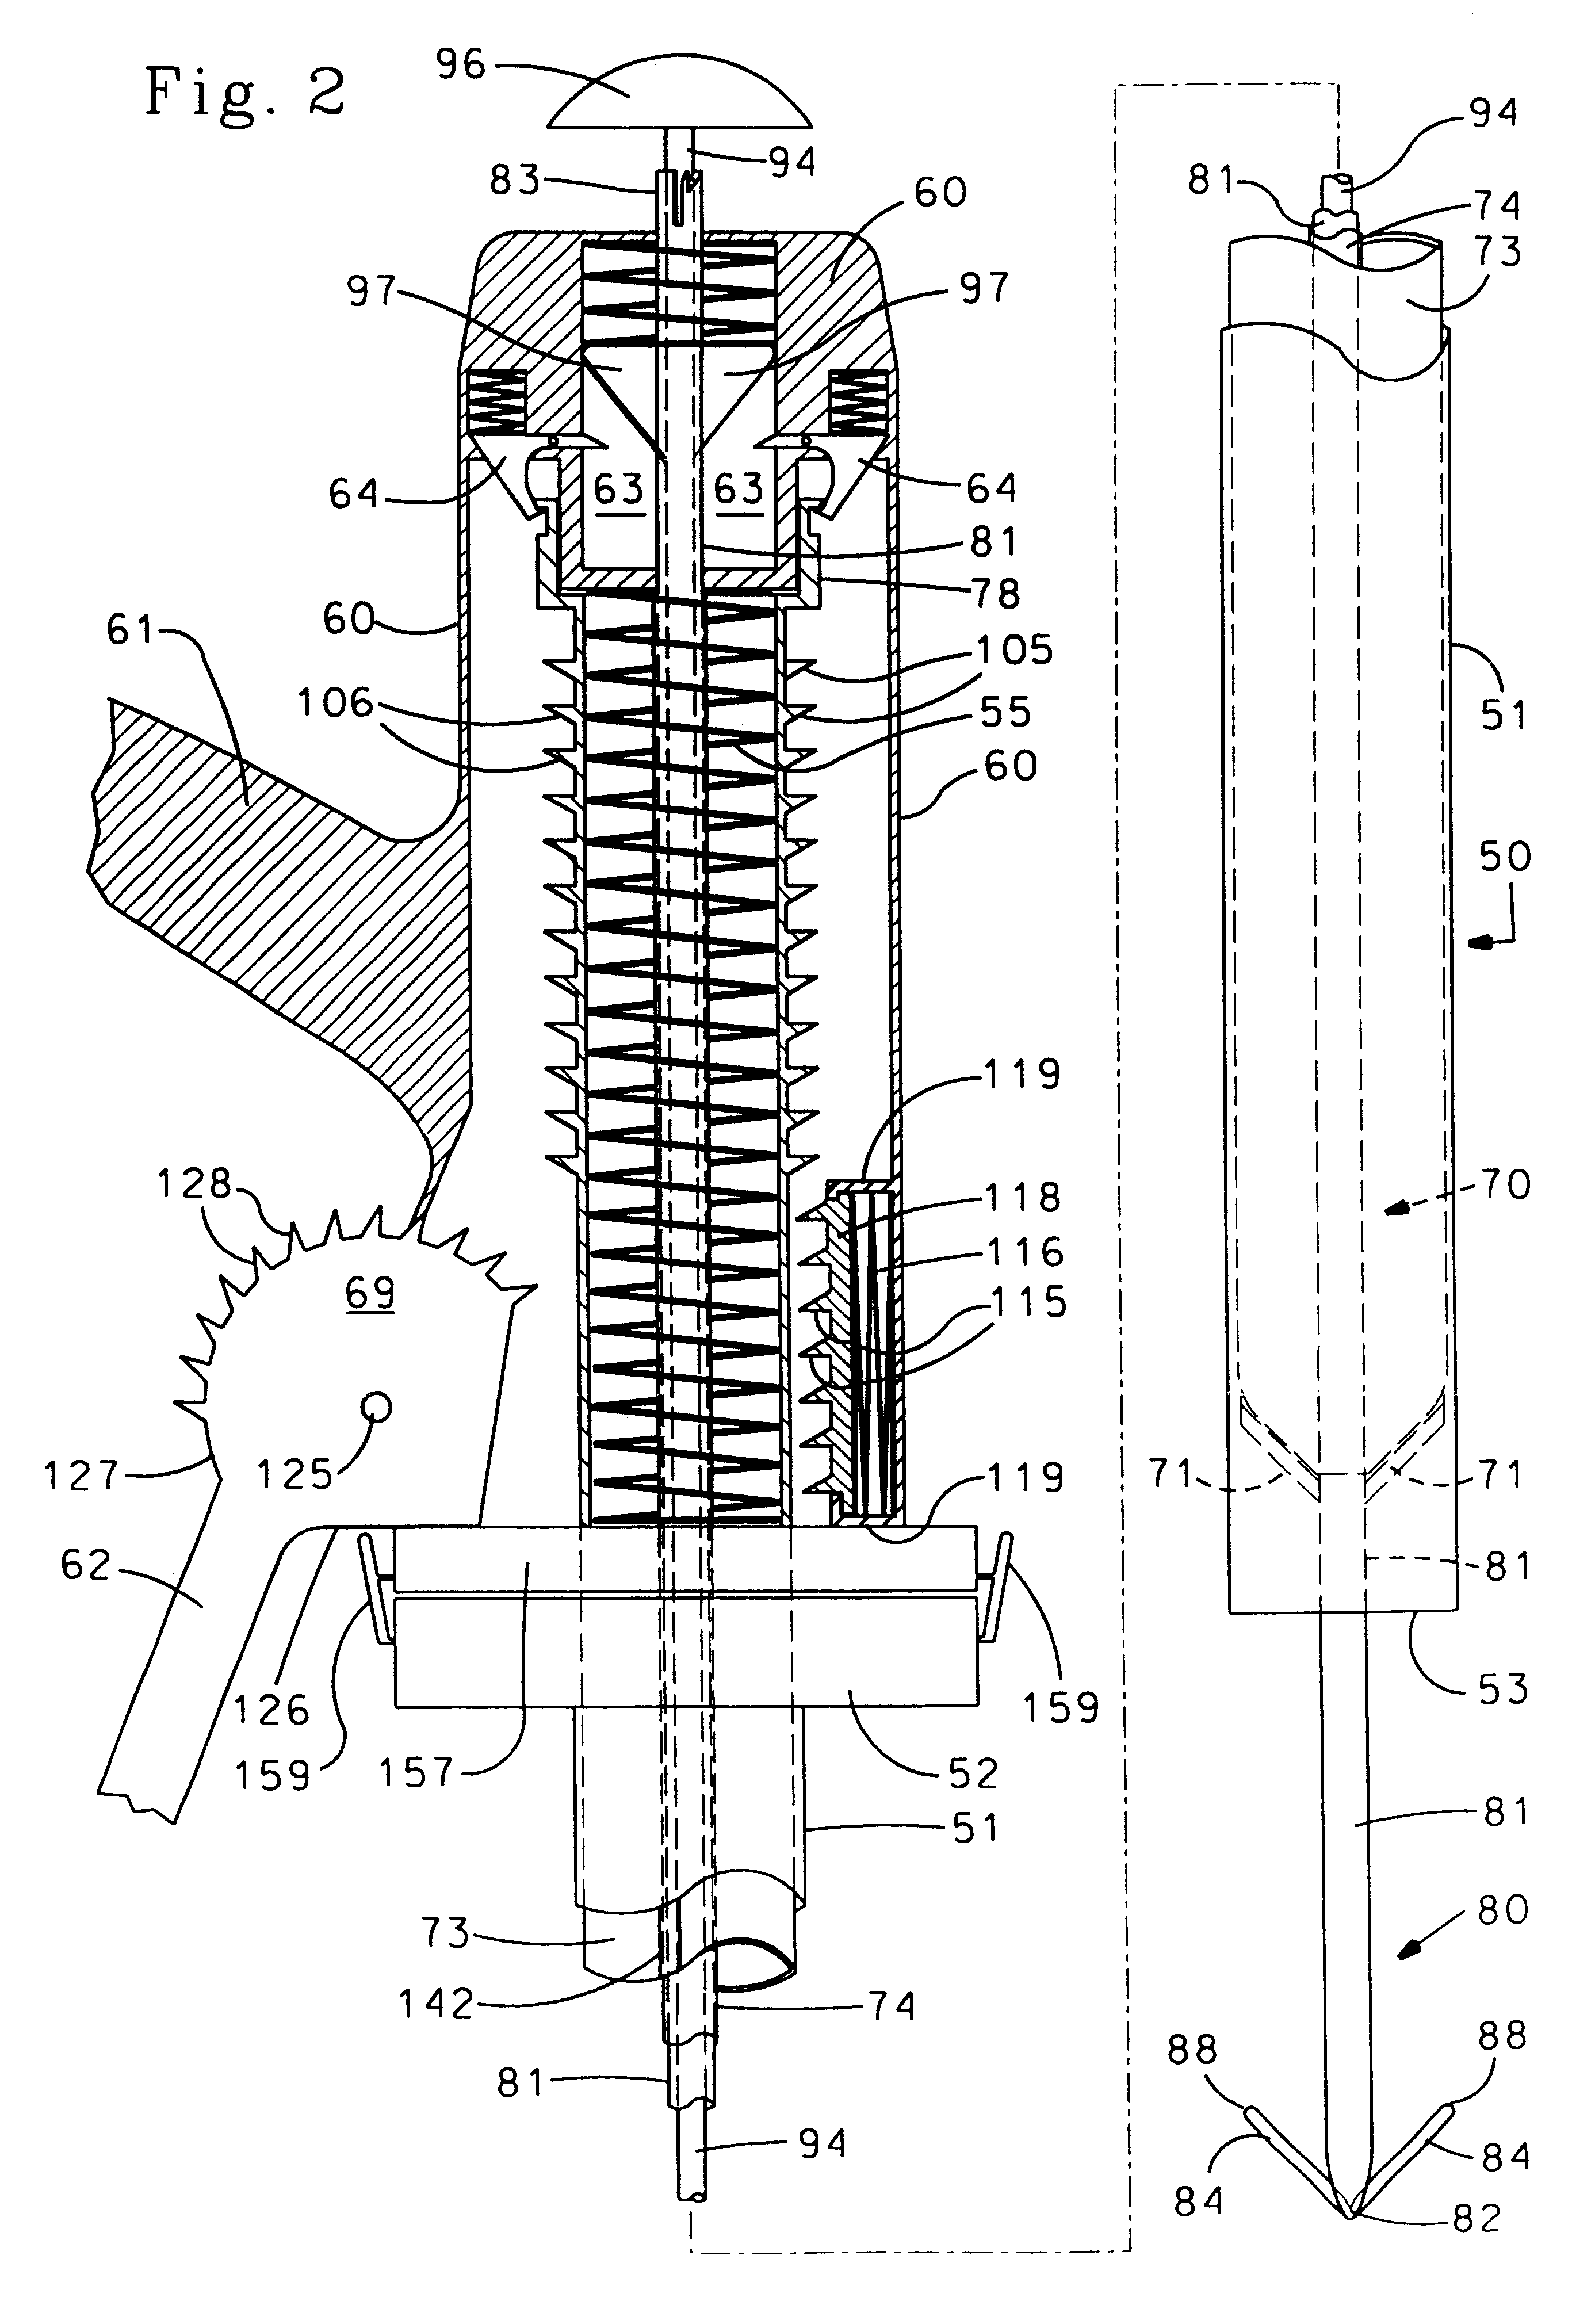 Apparatus and methods for the penetration of tissue